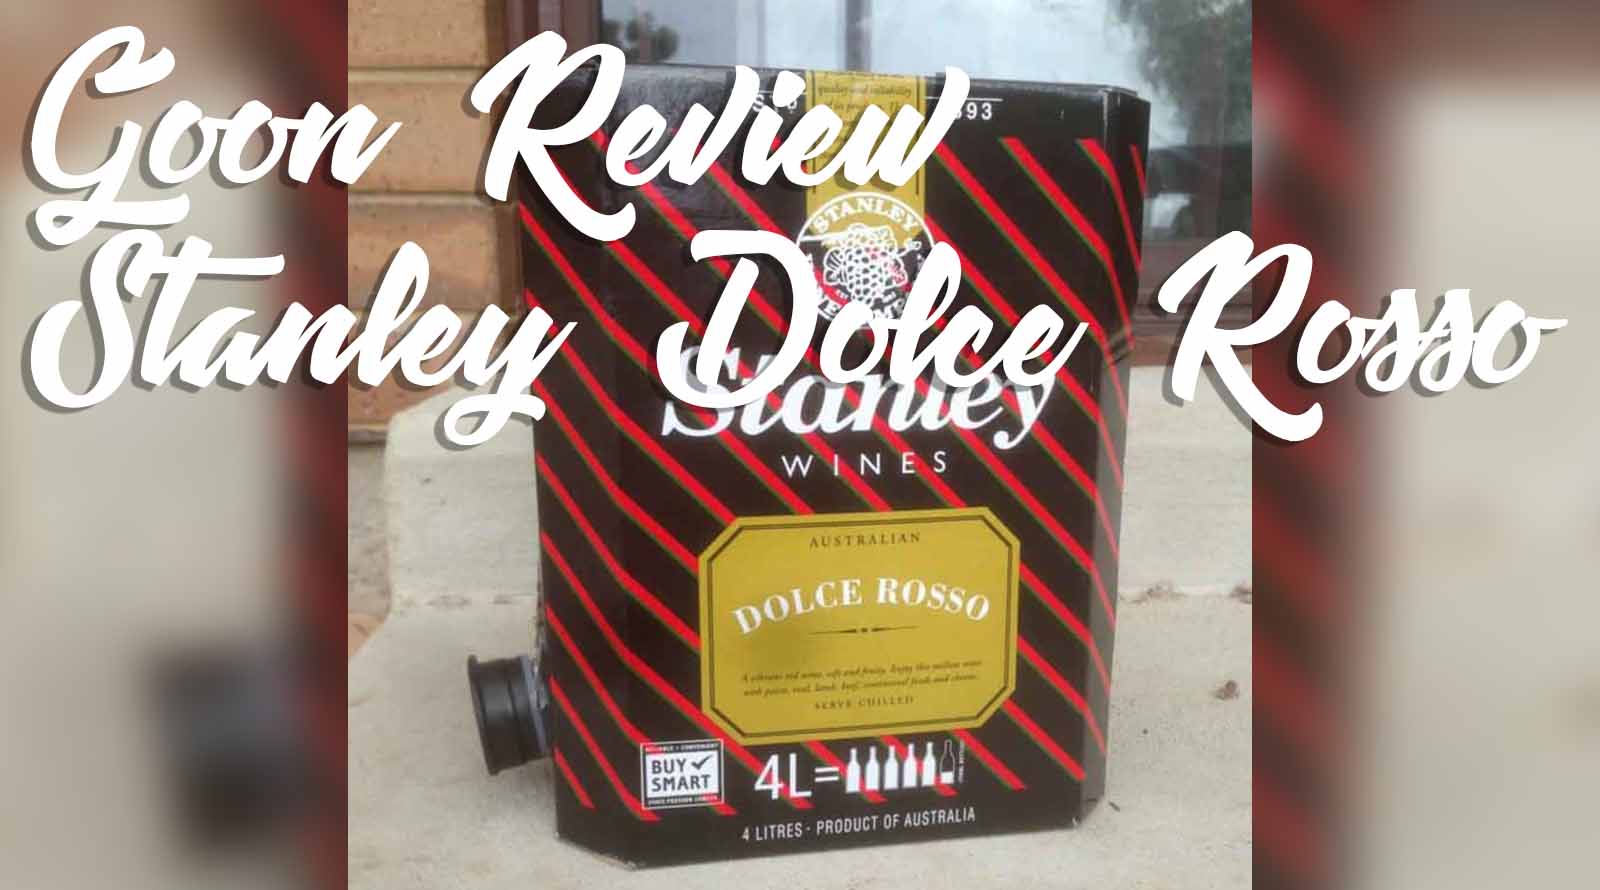 https://www.goodgoonguide.com/wp-content/uploads/2014/02/Stanley-Dolce-Rosso-Red-Goon-Cask-Box-Wine-Review.jpg